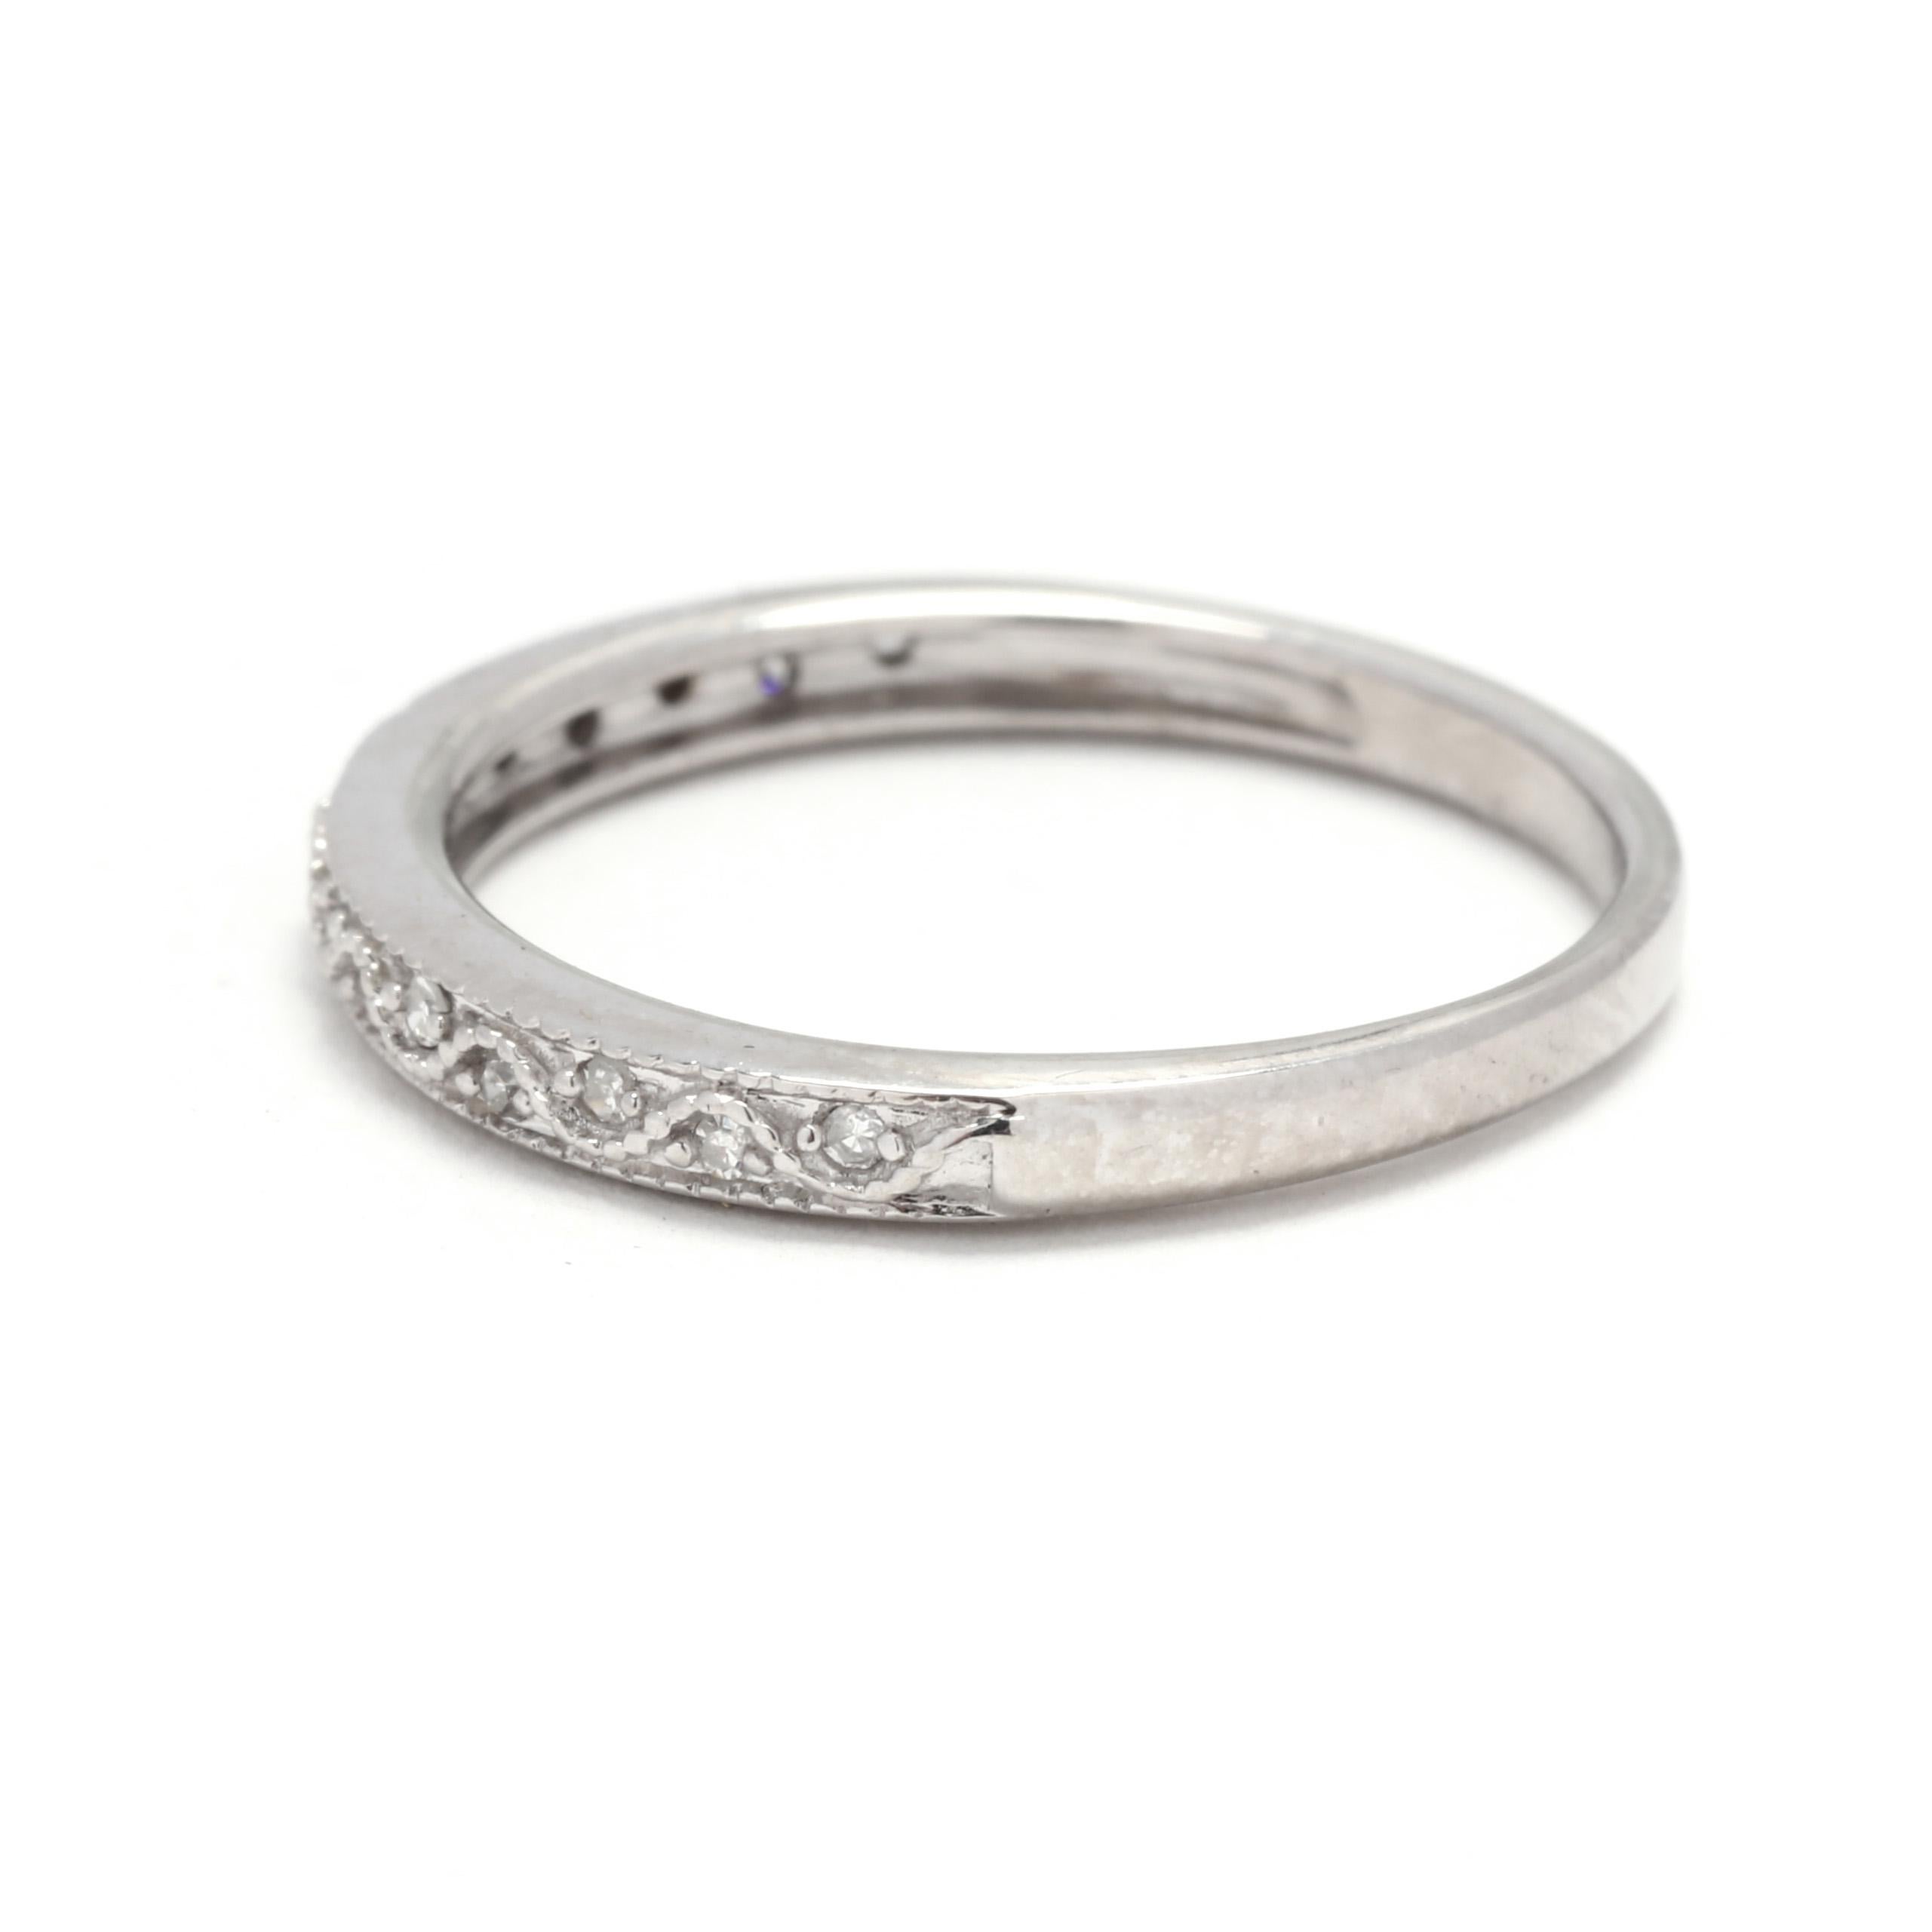 Round Cut Thin Diamond Wedding Band, 10KT White Gold, Ring, Thin Stackable Band